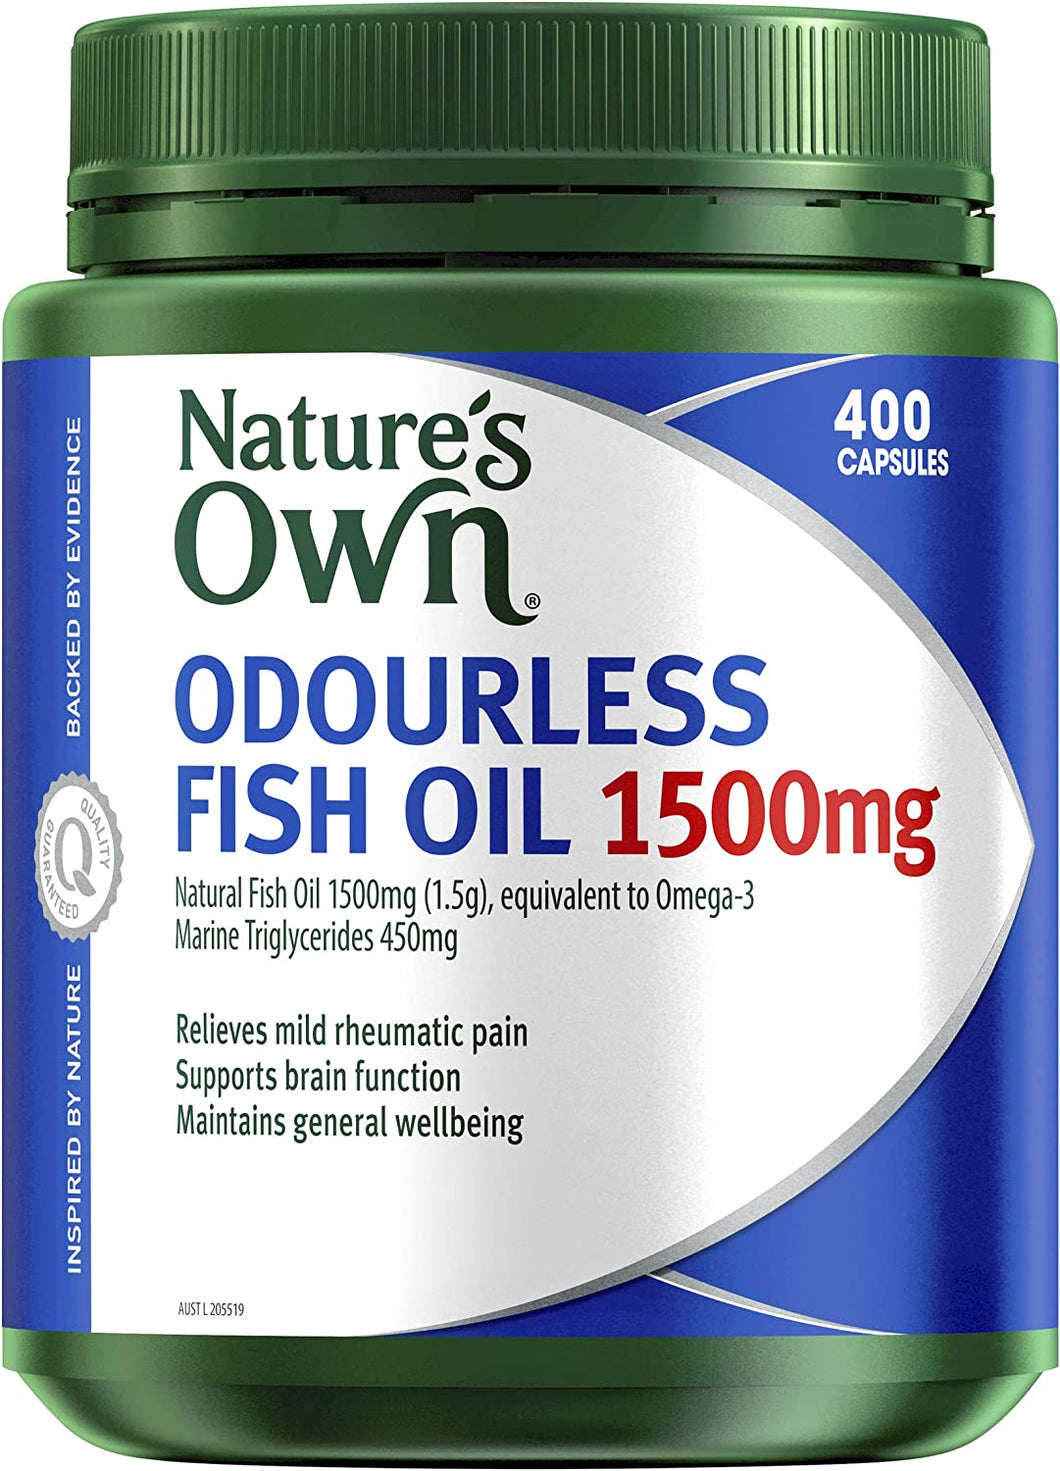 Odourless Fish Oil 1500Mg - Naturally-Derived Omega-3 - Maintains General Health and Wellbeing, Relieves Mild Rheumatic Aches and Pains, 400 Capsules